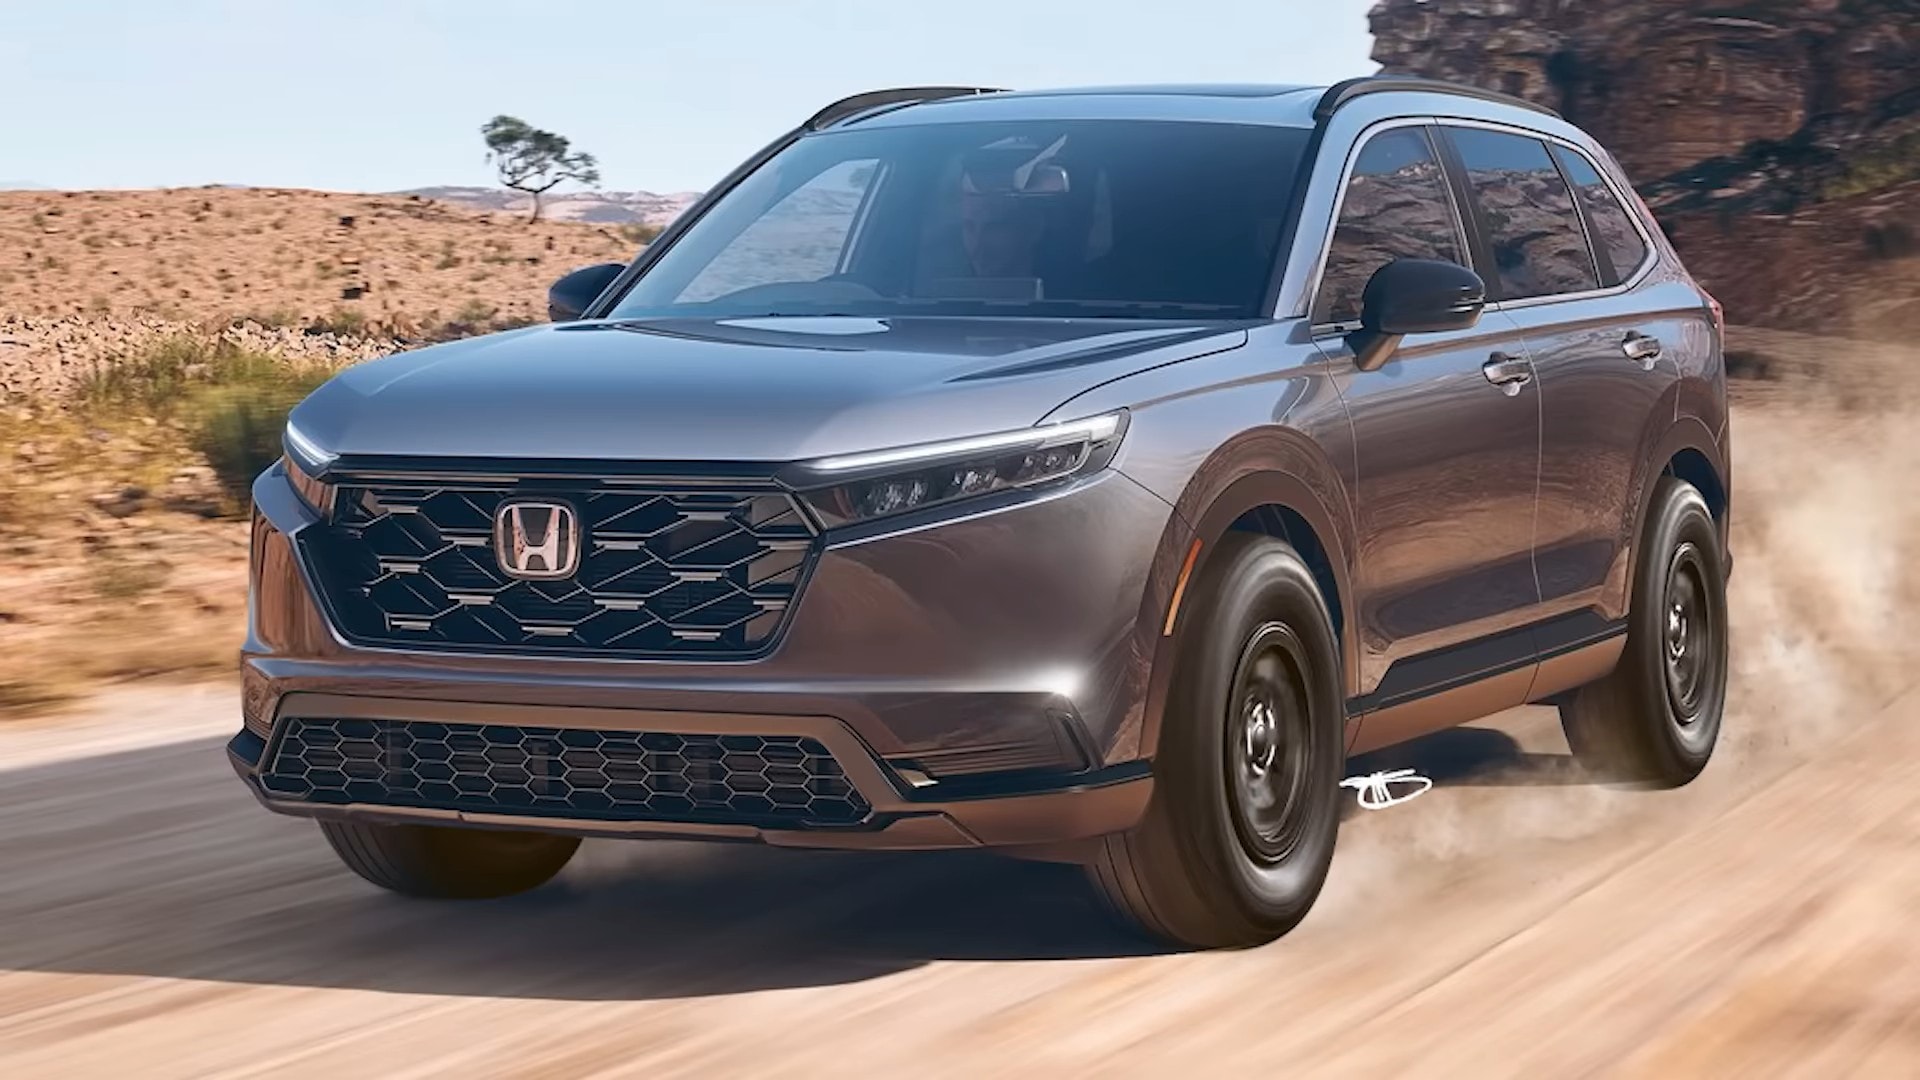 All-New 2023 Honda CR-V Is Treated as a Mere Facelift, Gets Rugged CGI